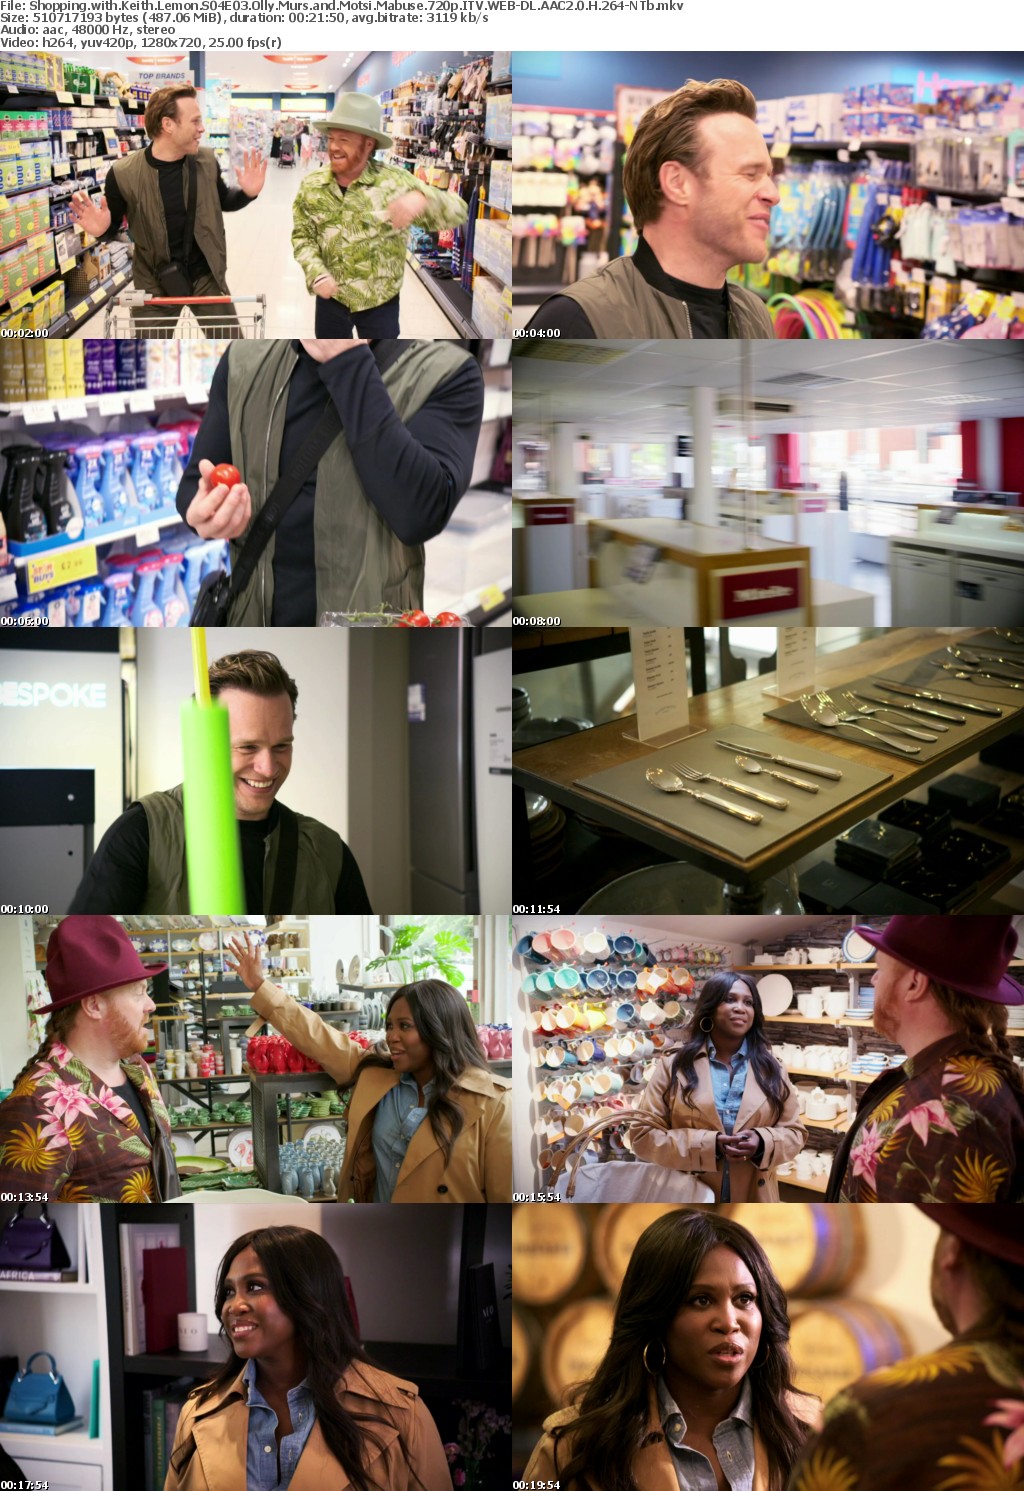 Shopping with Keith Lemon S04E03 Olly Murs and Motsi Mabuse 720p ITV WEB-DL AAC2 0 H 264-NTb